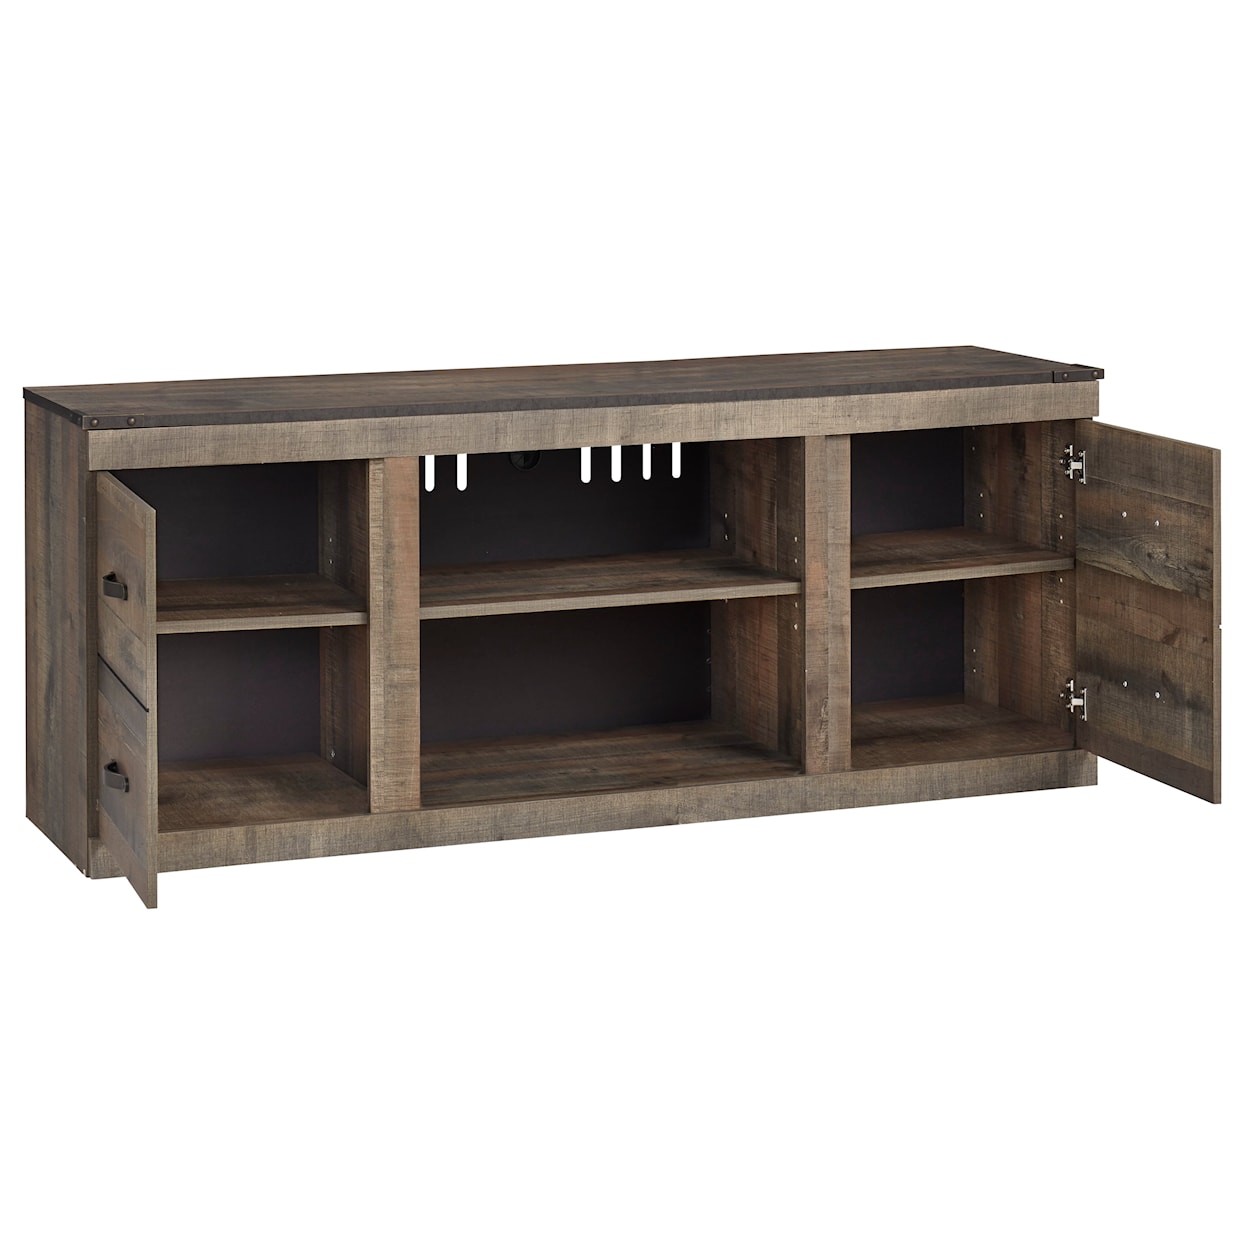 Signature Design By Ashley Trinell Ew0446 268 60 Tv Stand Rifes